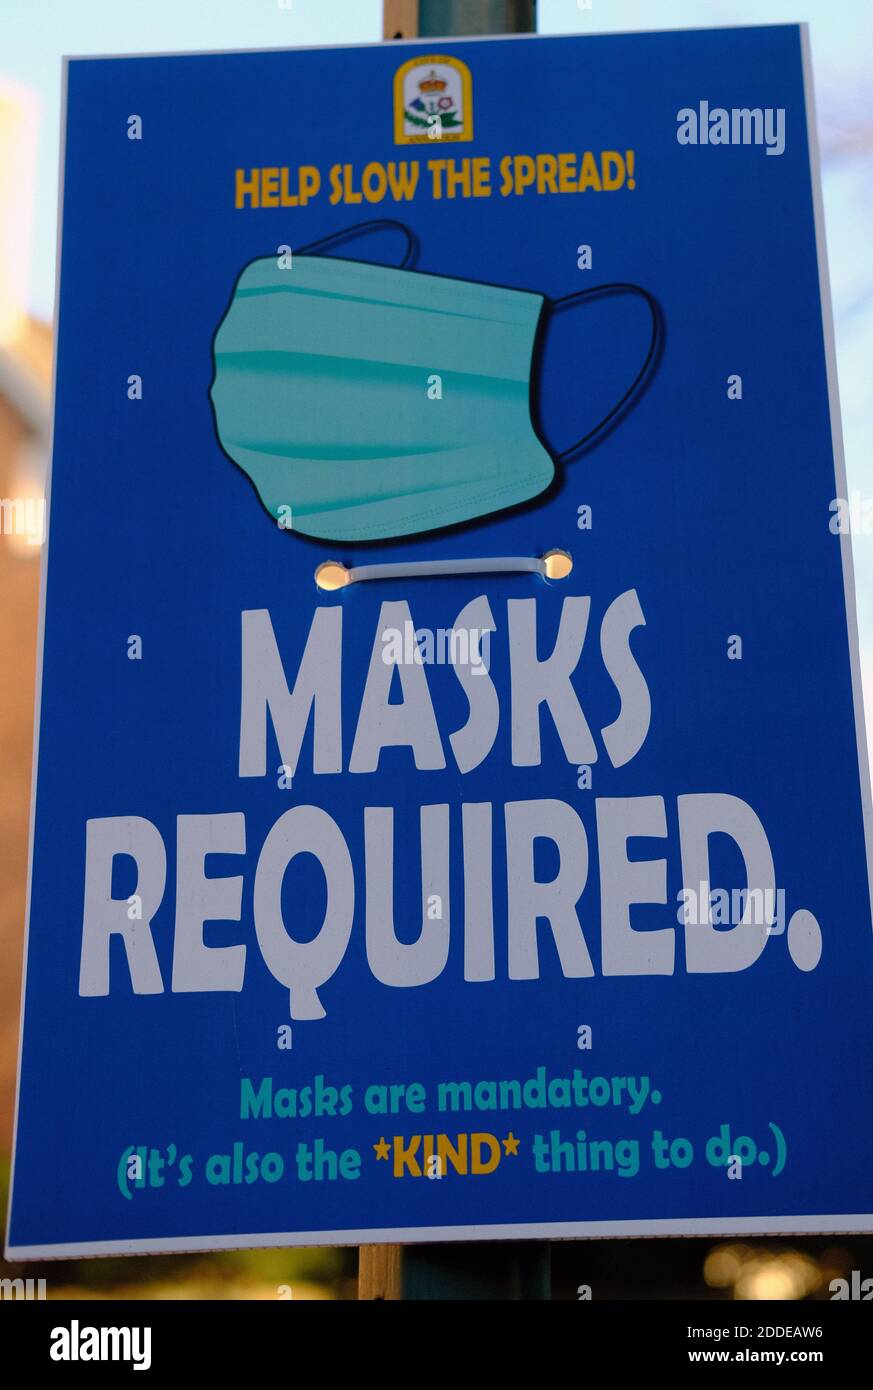 Masks required sign. Stock Photo